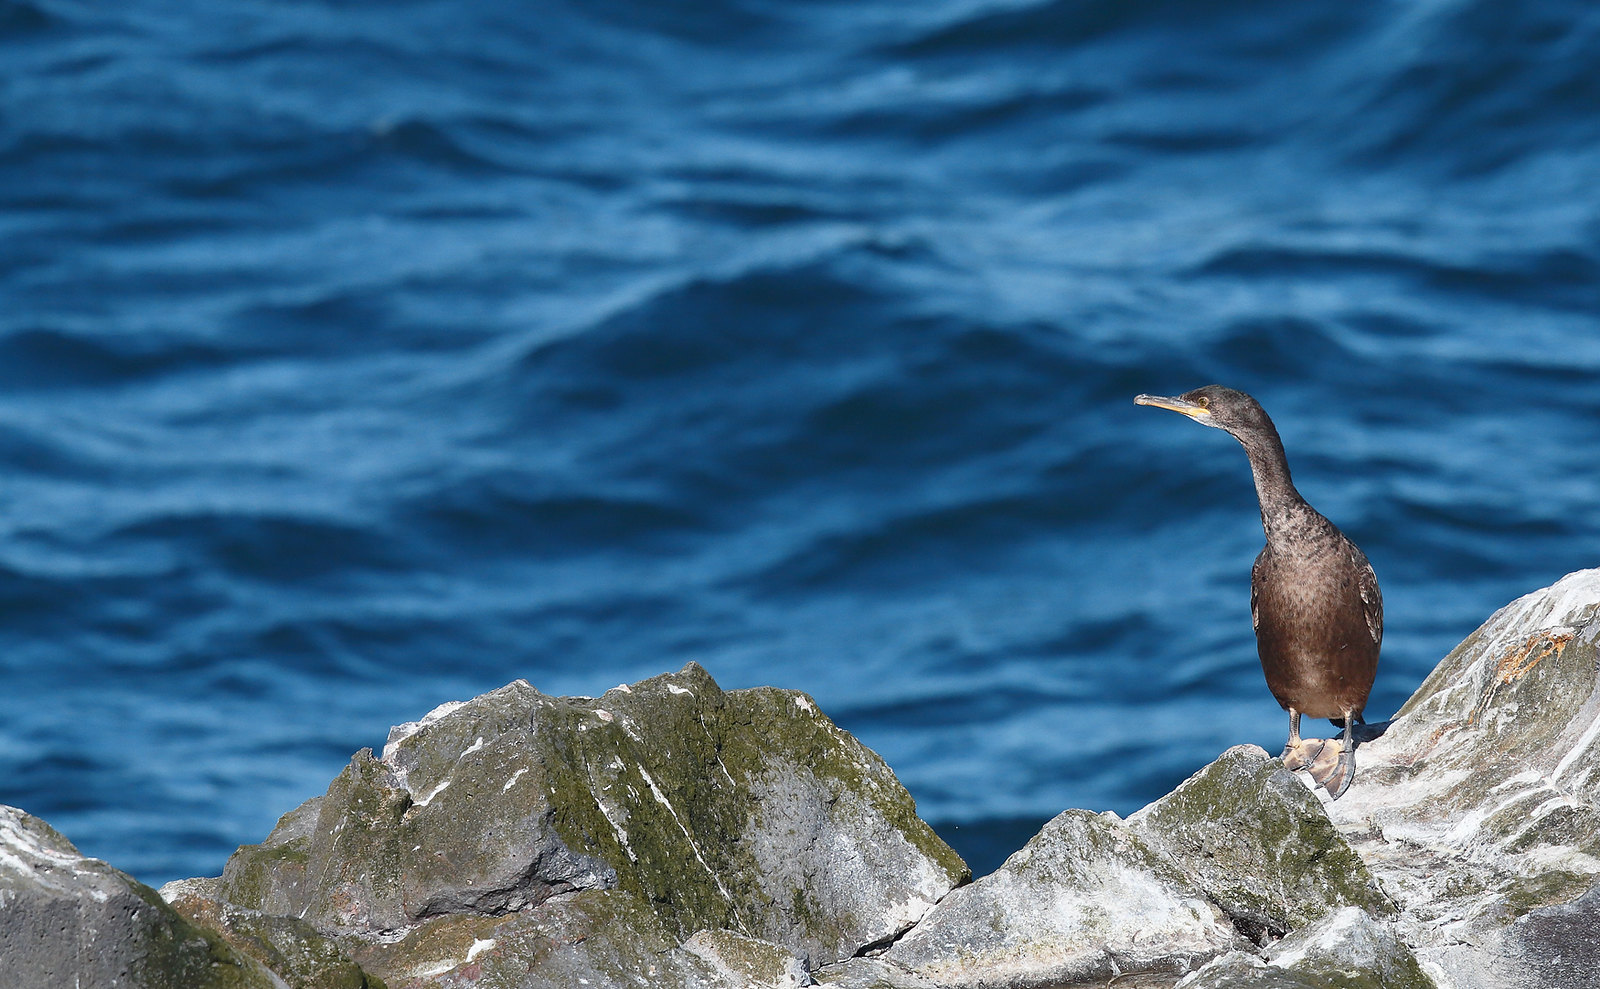 Another Shag on another rock